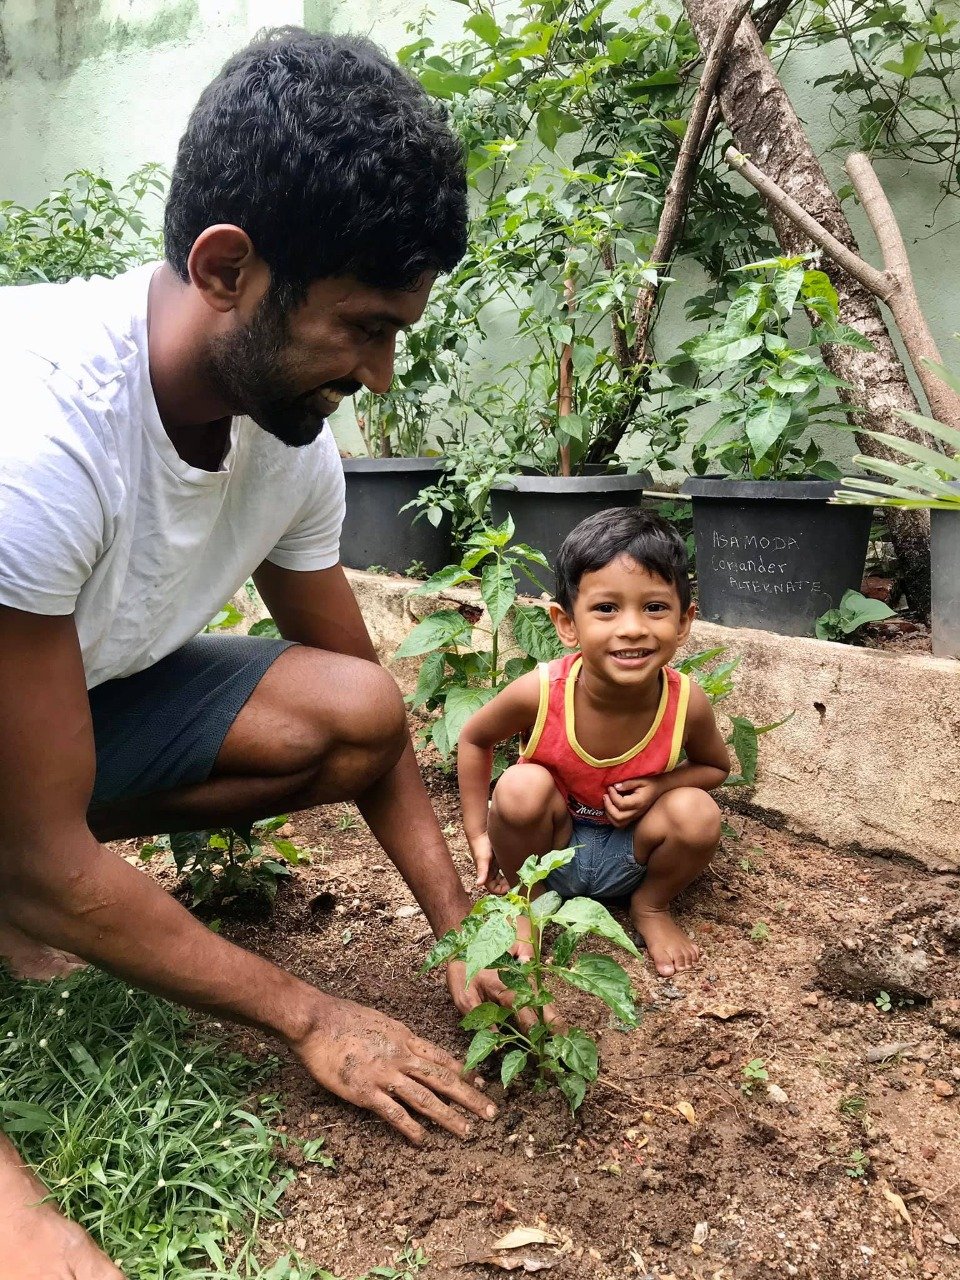 Former Sri Lankan Full Back Rizah Mubarak posted the image on his Facebook encouraging everyone to engage in Home Gardening. 